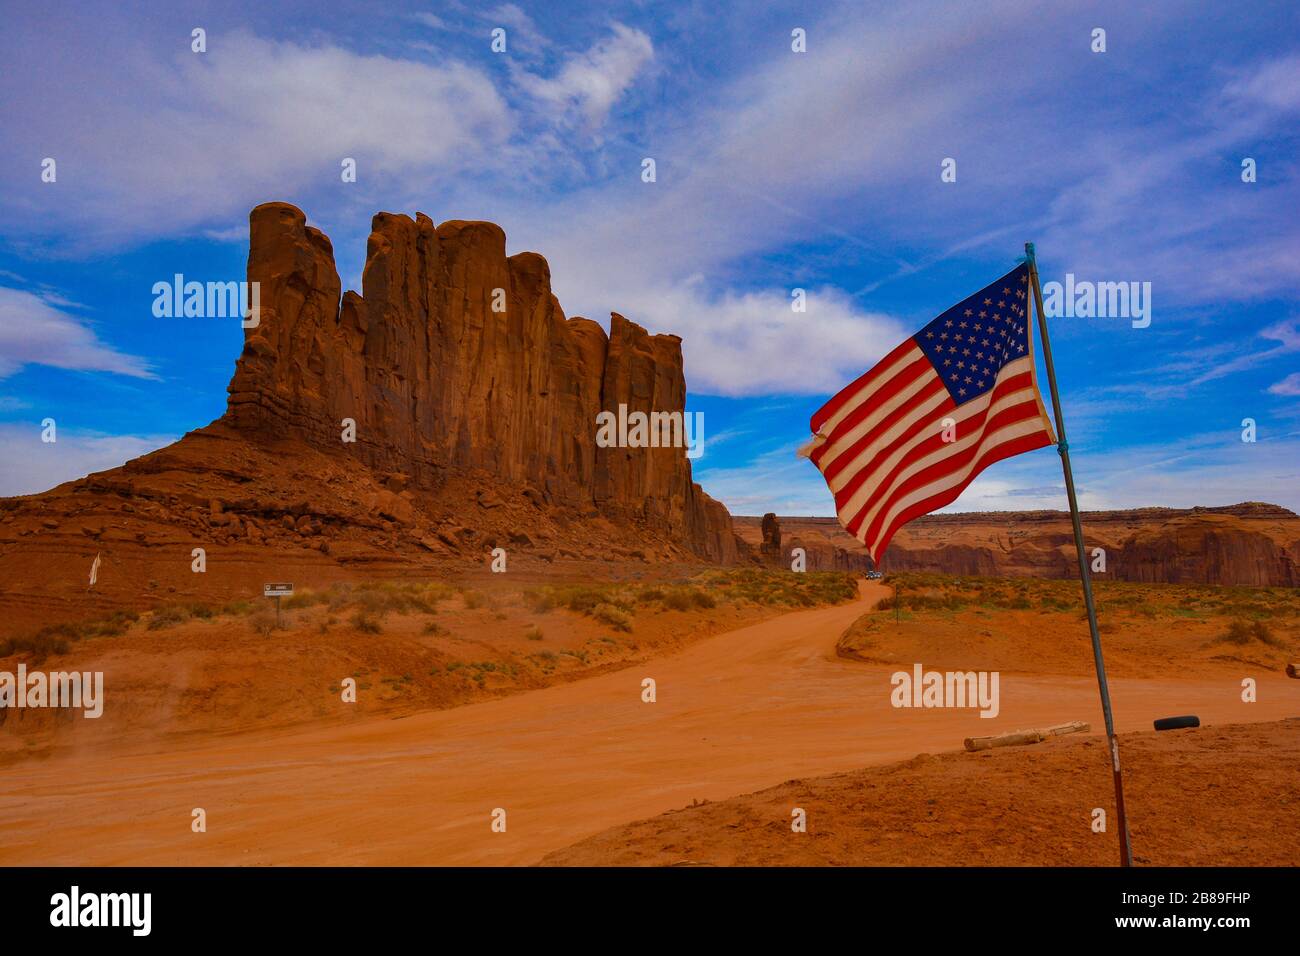 Breathtaking view of the camel butte in Monument Valley. The american flag waves in the blue sky, amazing red rocks and orange dirt road, typical of t Stock Photo